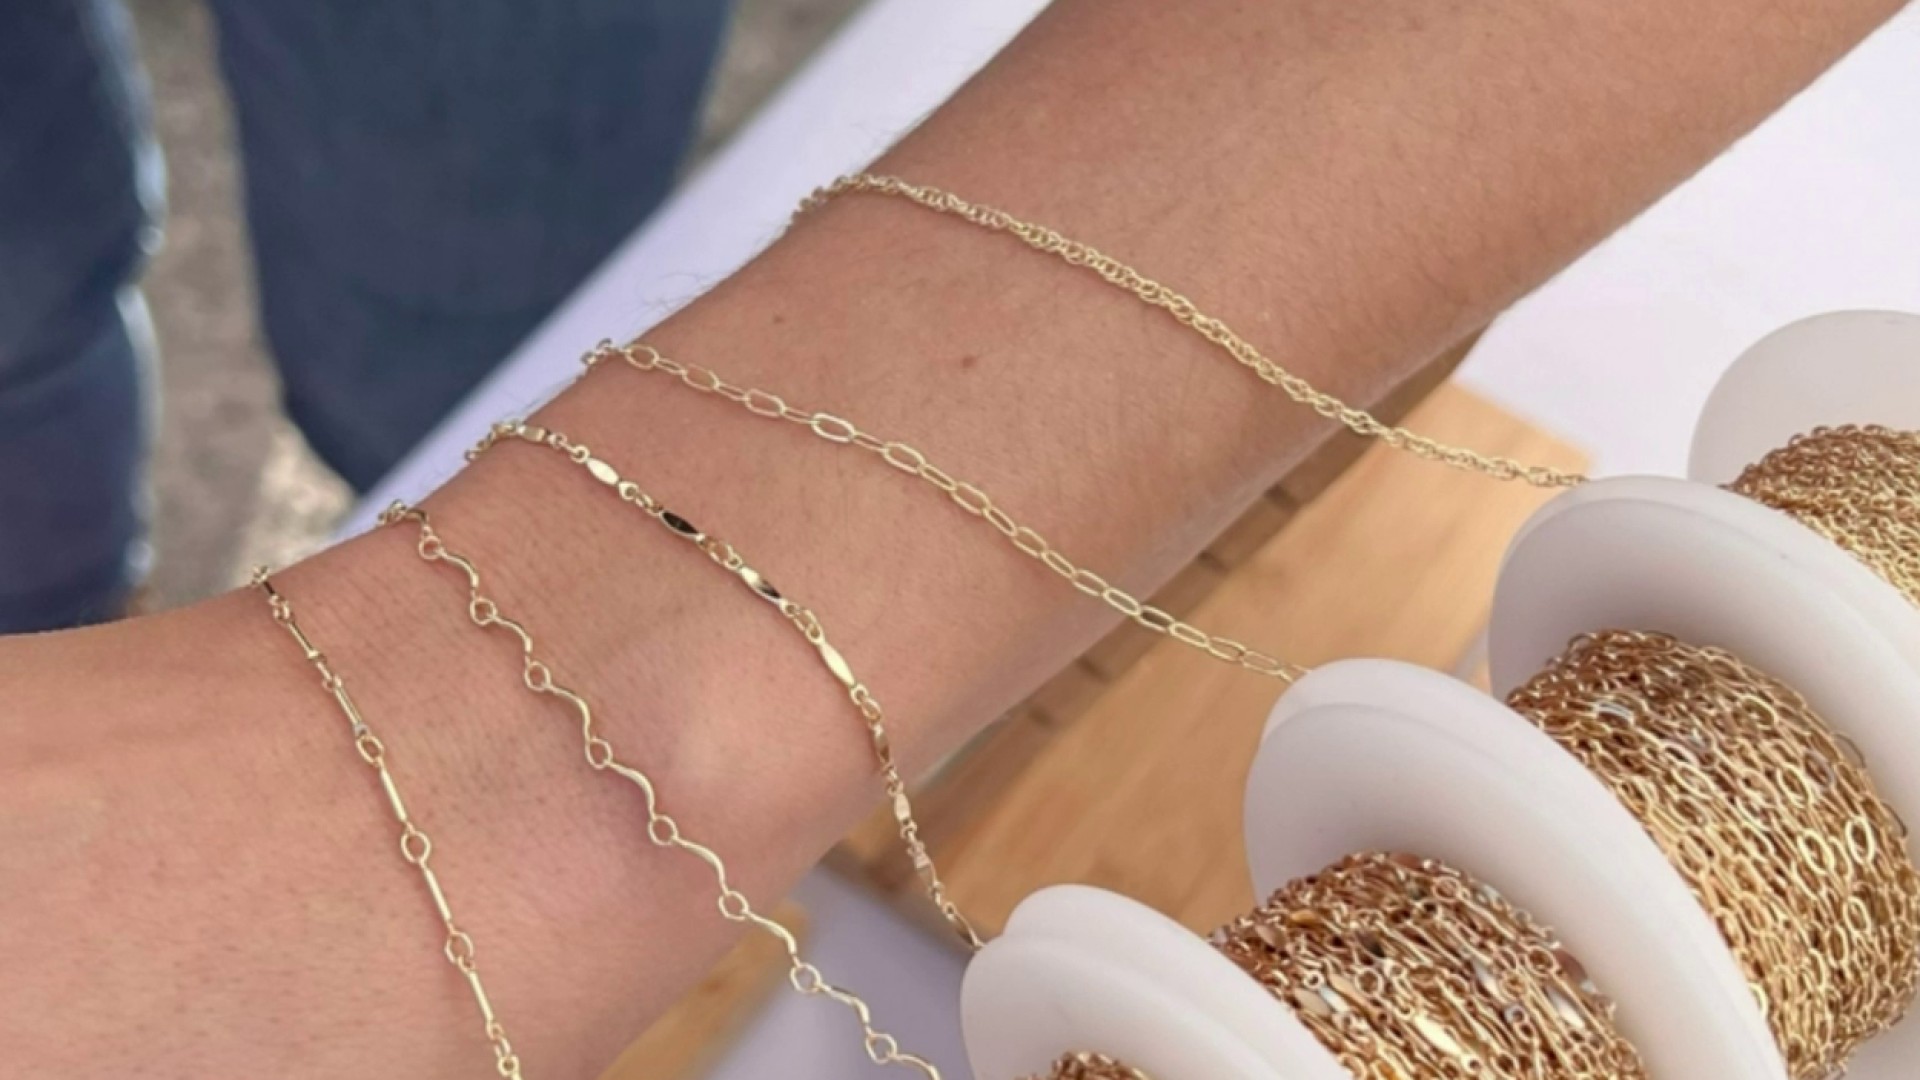 Are you linked into the new jewelry trend?